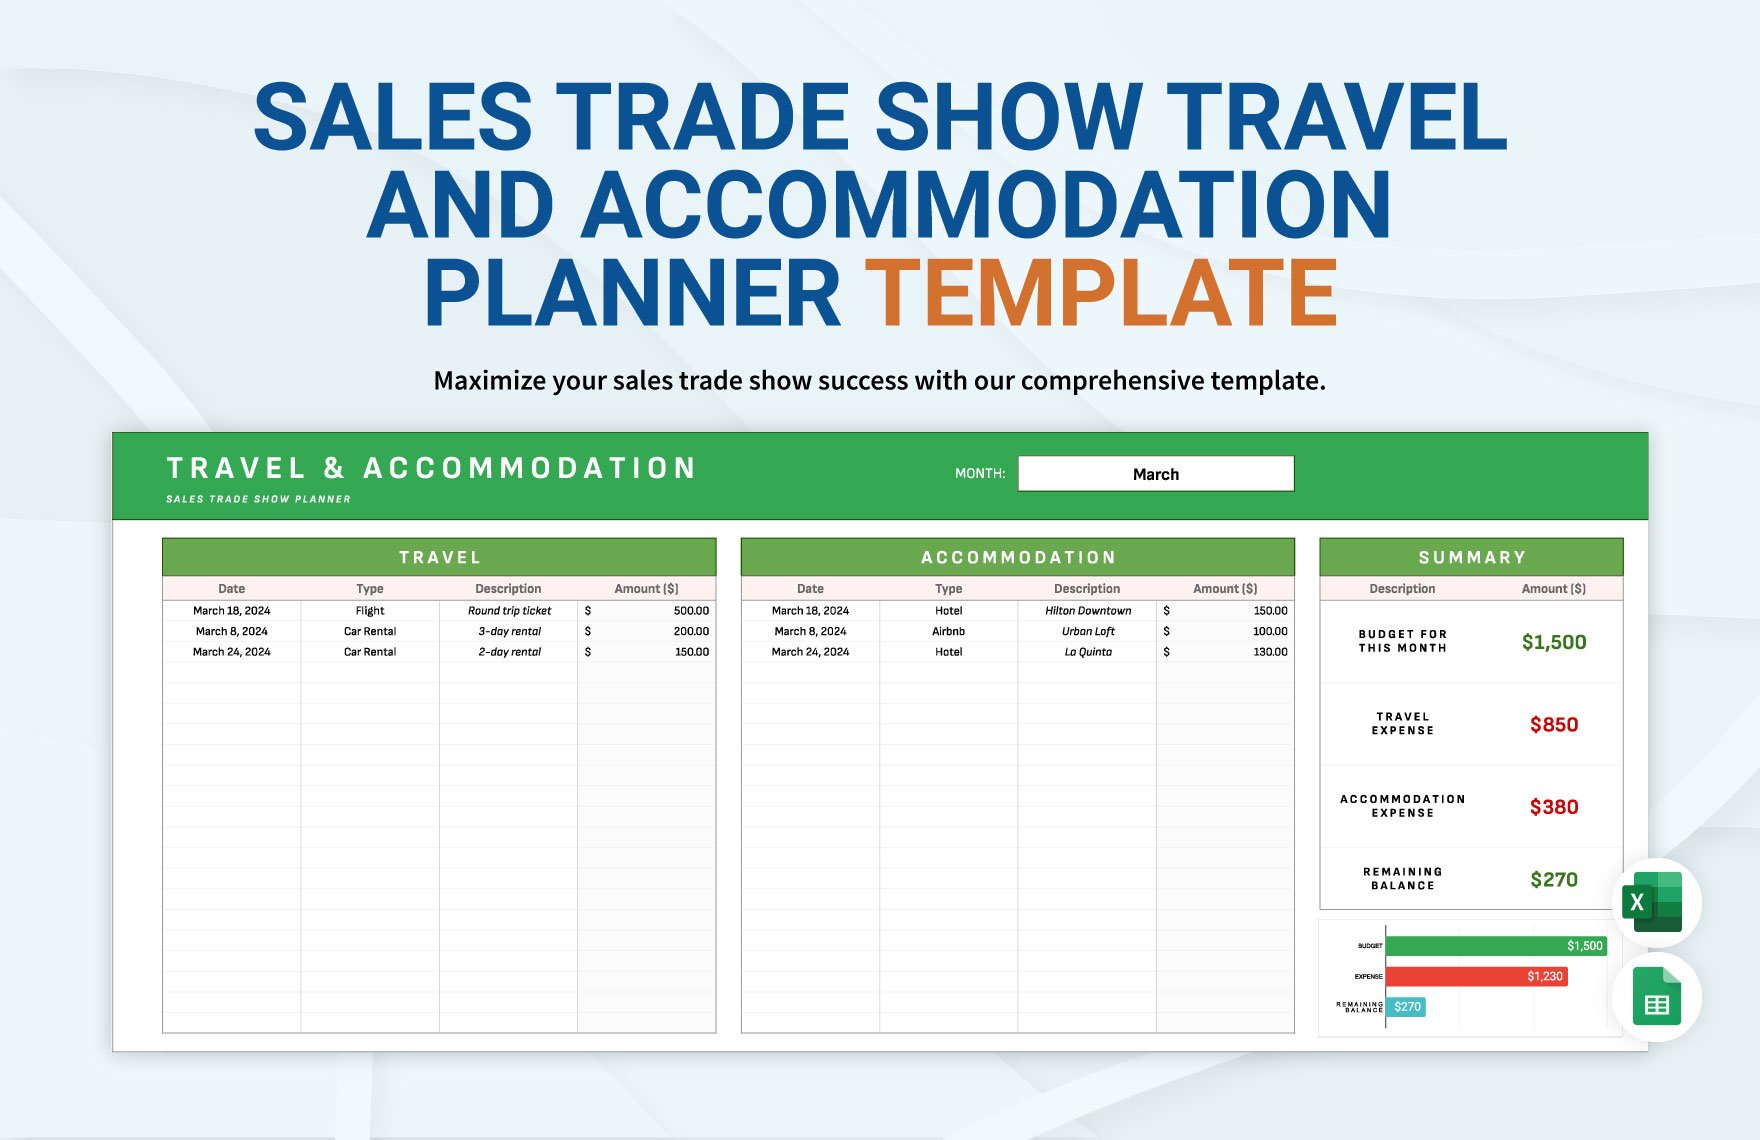 Sales Trade Show Travel and Accommodation Planner Template